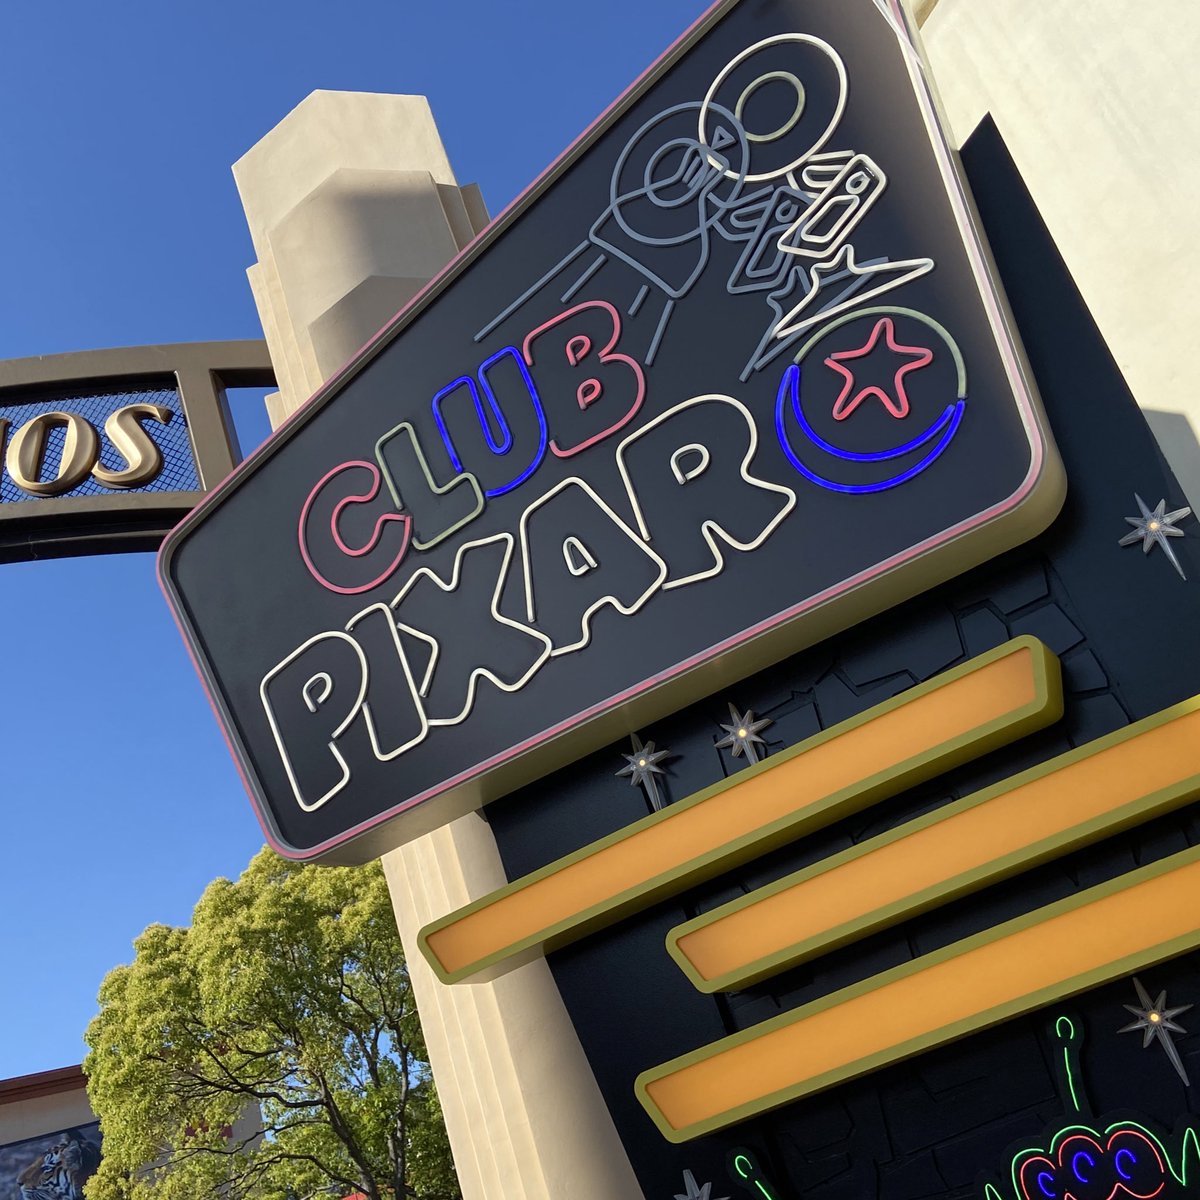 If they don’t change “Club Pixar” to a Mad T Party style event in the summer, that’s a big miss.